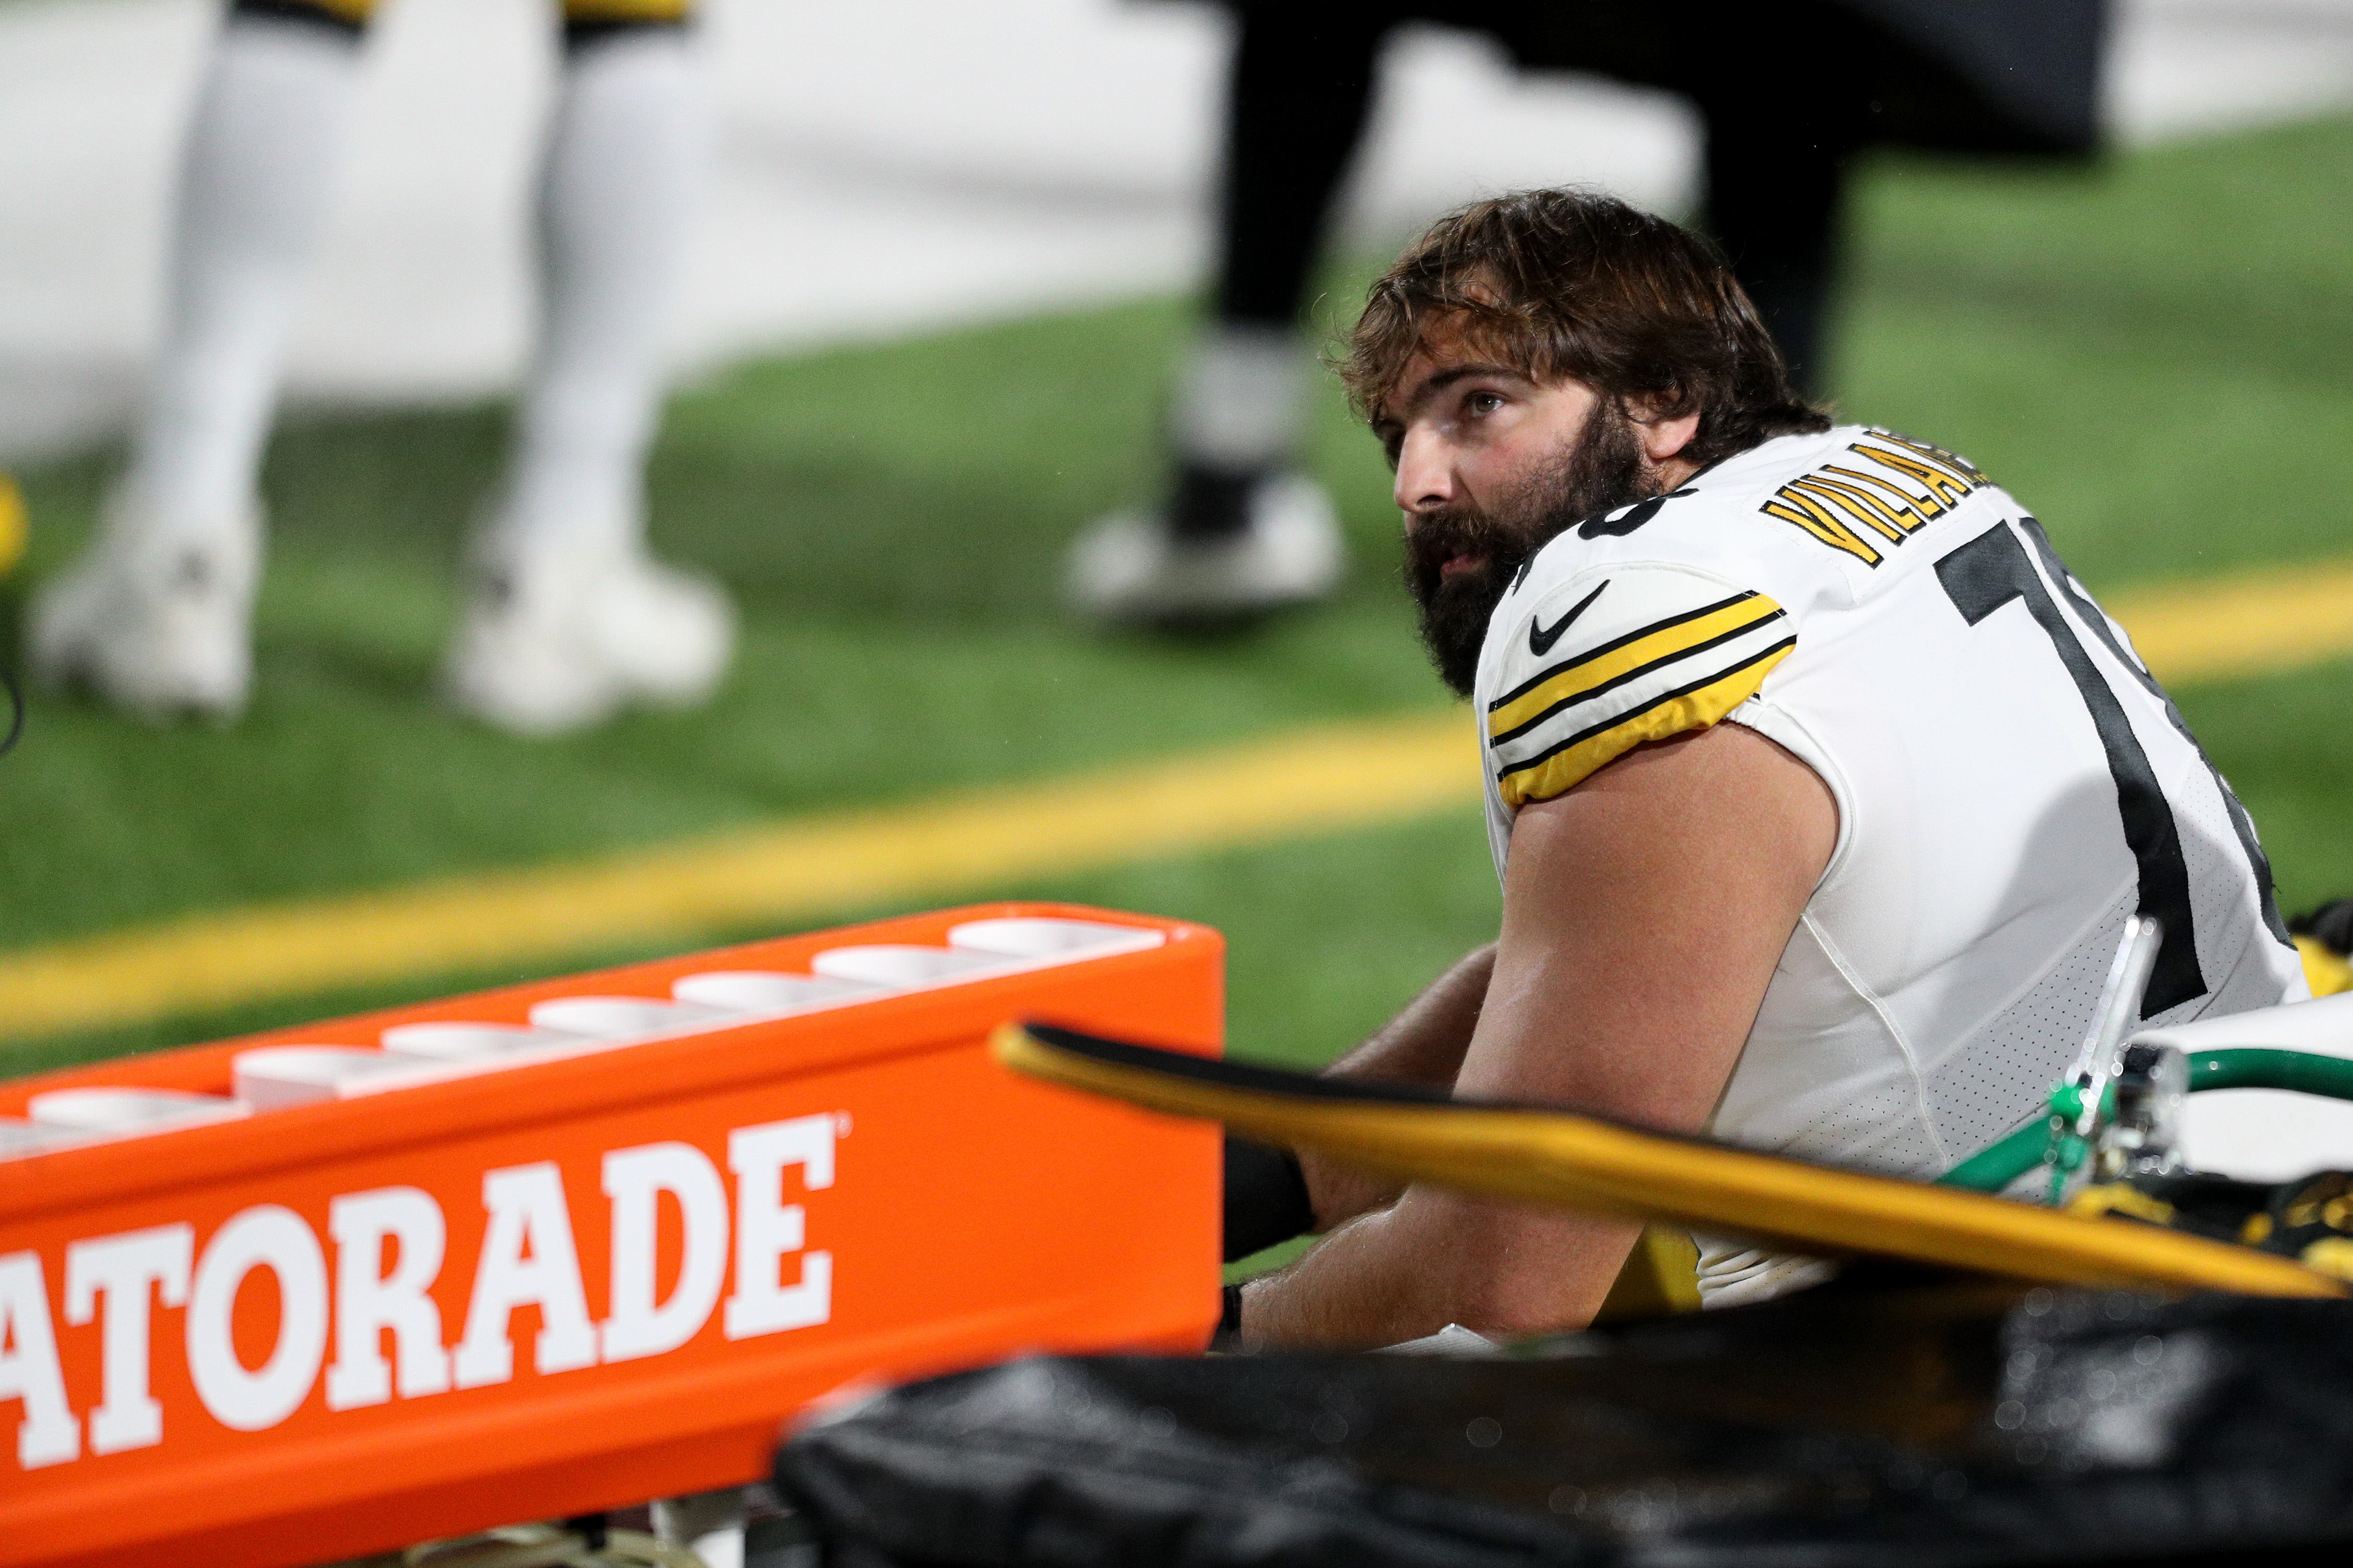 Alejandro Villanueva Just Shifted the AFC North Power Balance by Leaving Ben Roethlisberger and the Steelers to Sign With the Ravens